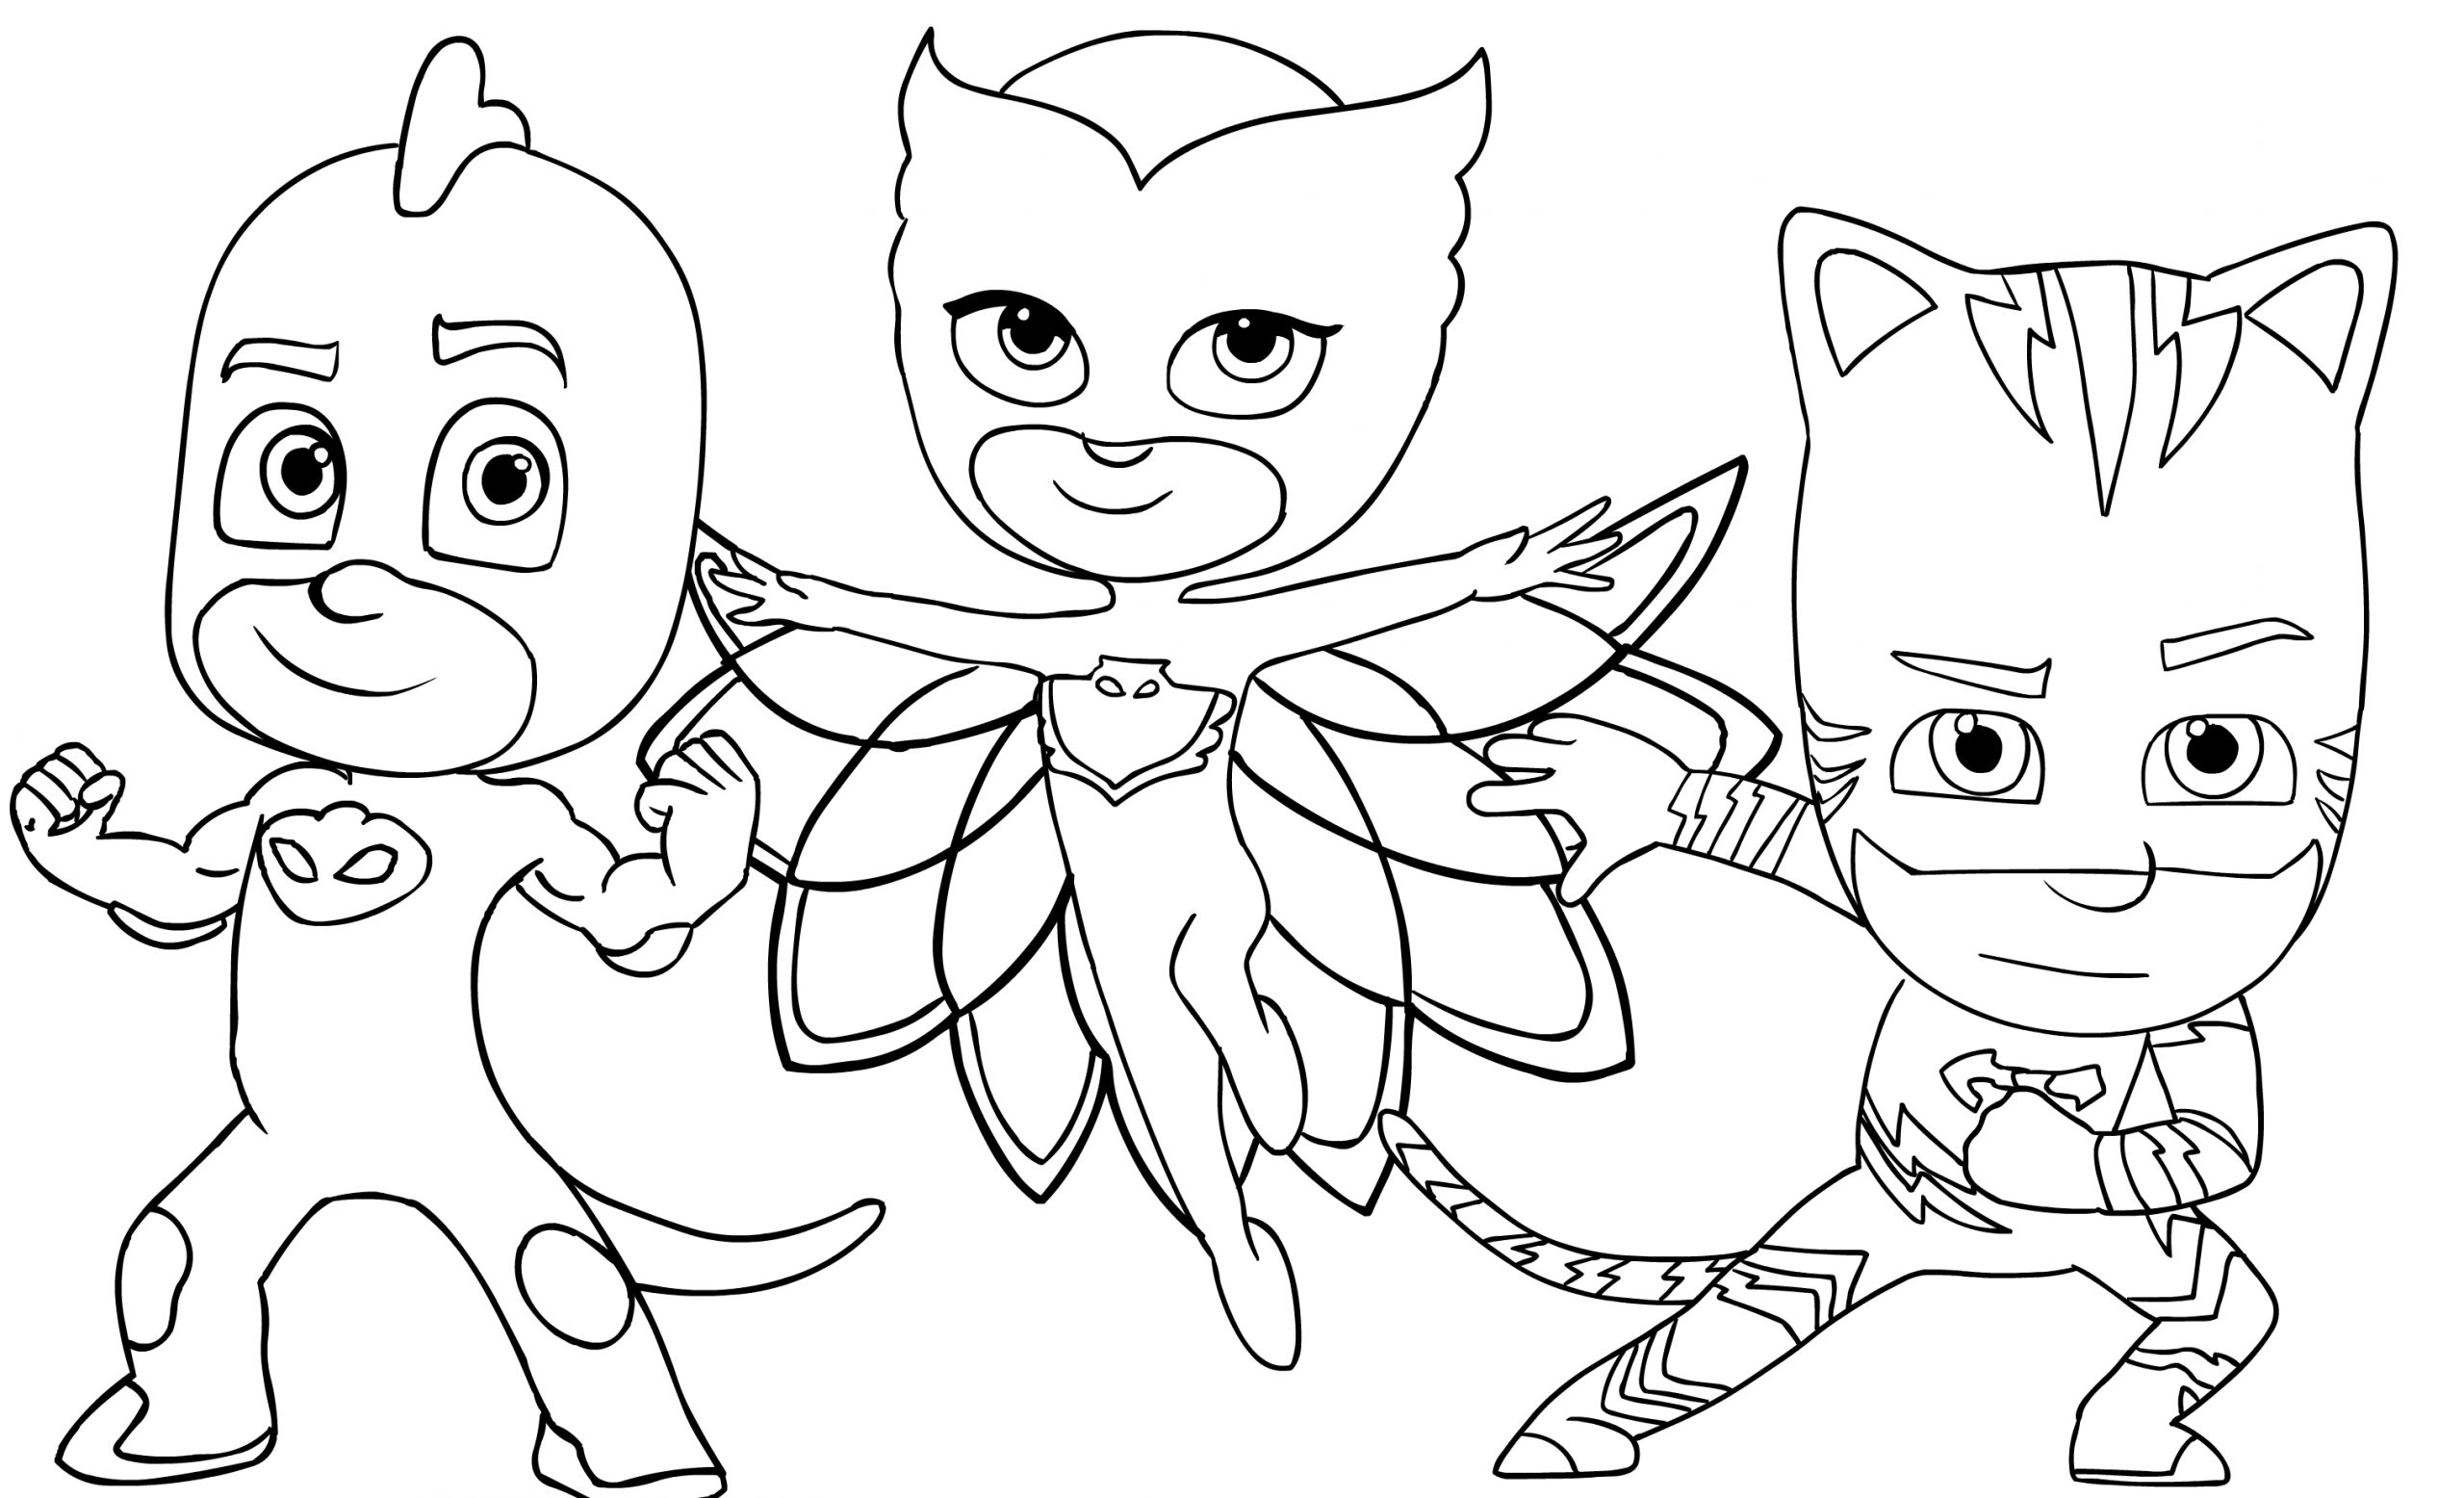 Pj Masks Coloring Sheet More 100 coloring pages from cartoon coloring ...